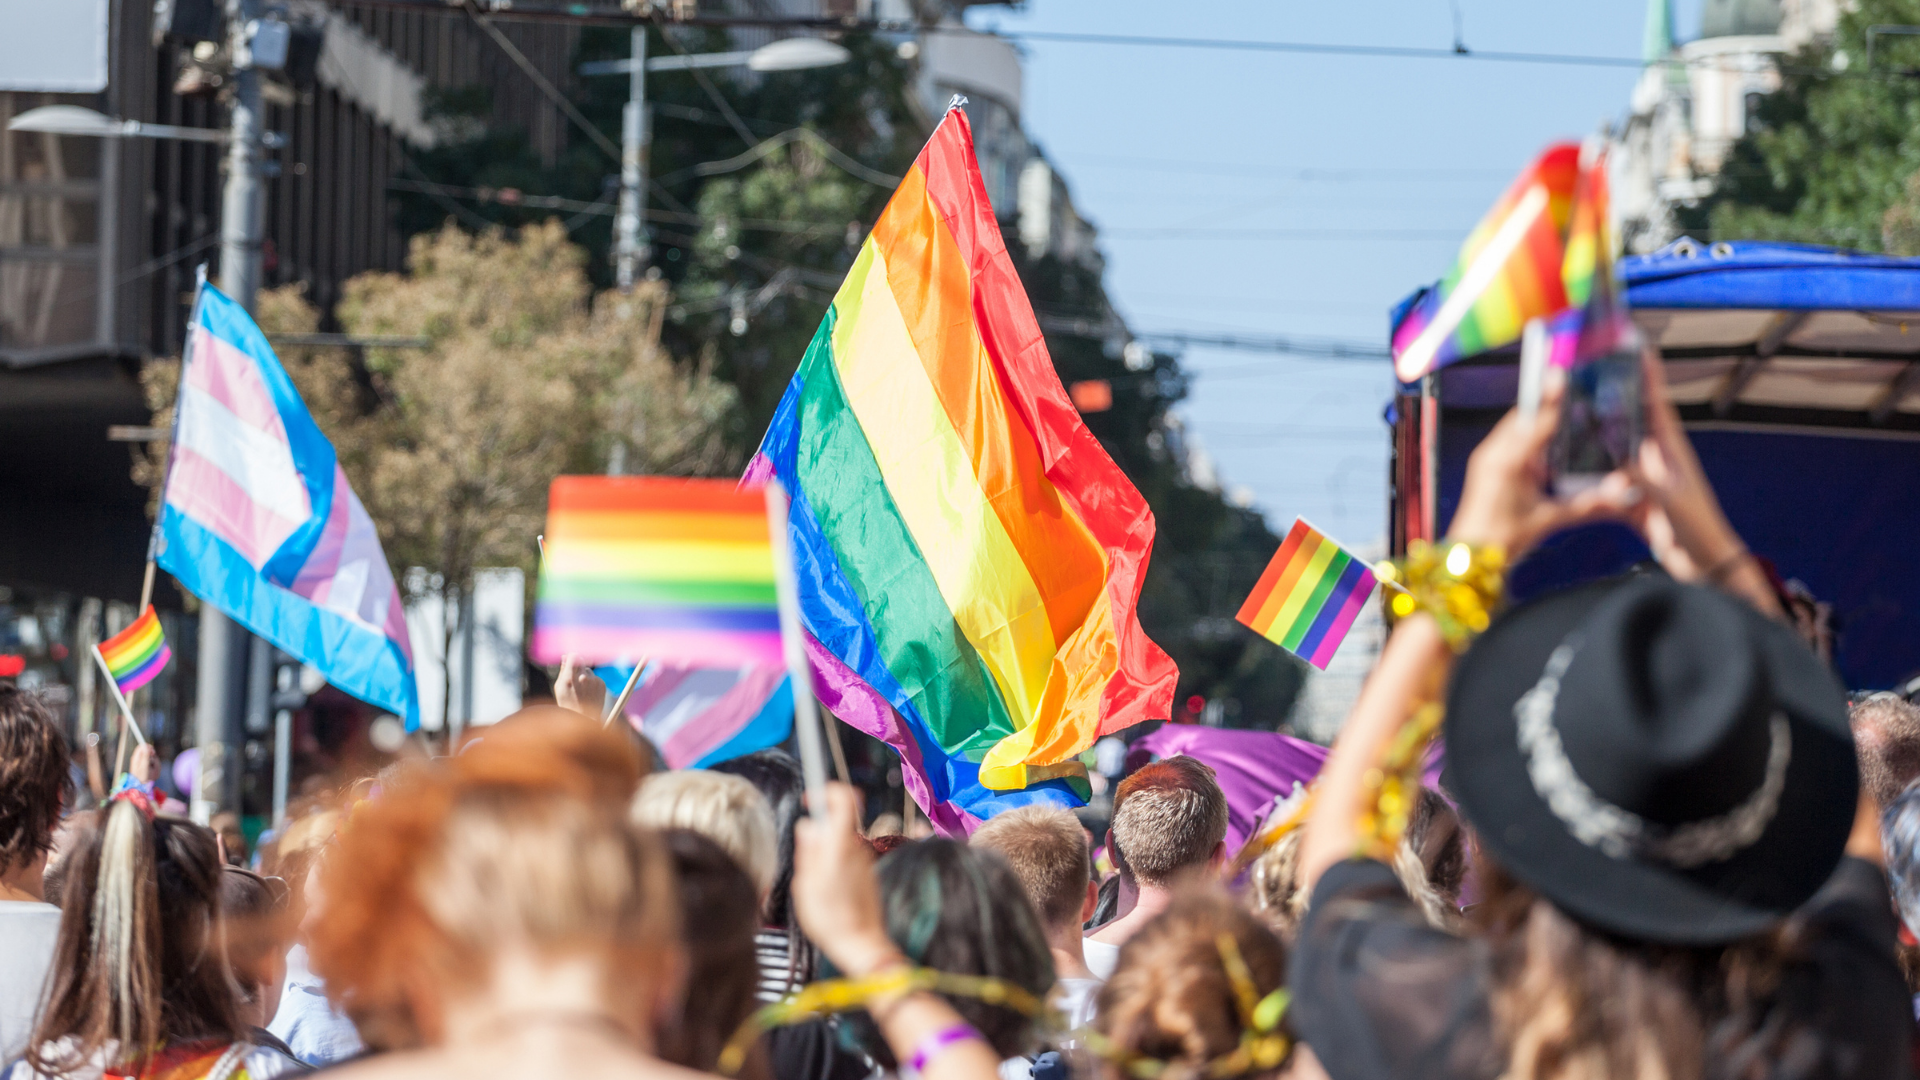 Photo of a Pride parade taken from among the marchers. Marchers hold up gay and trans pride flags.